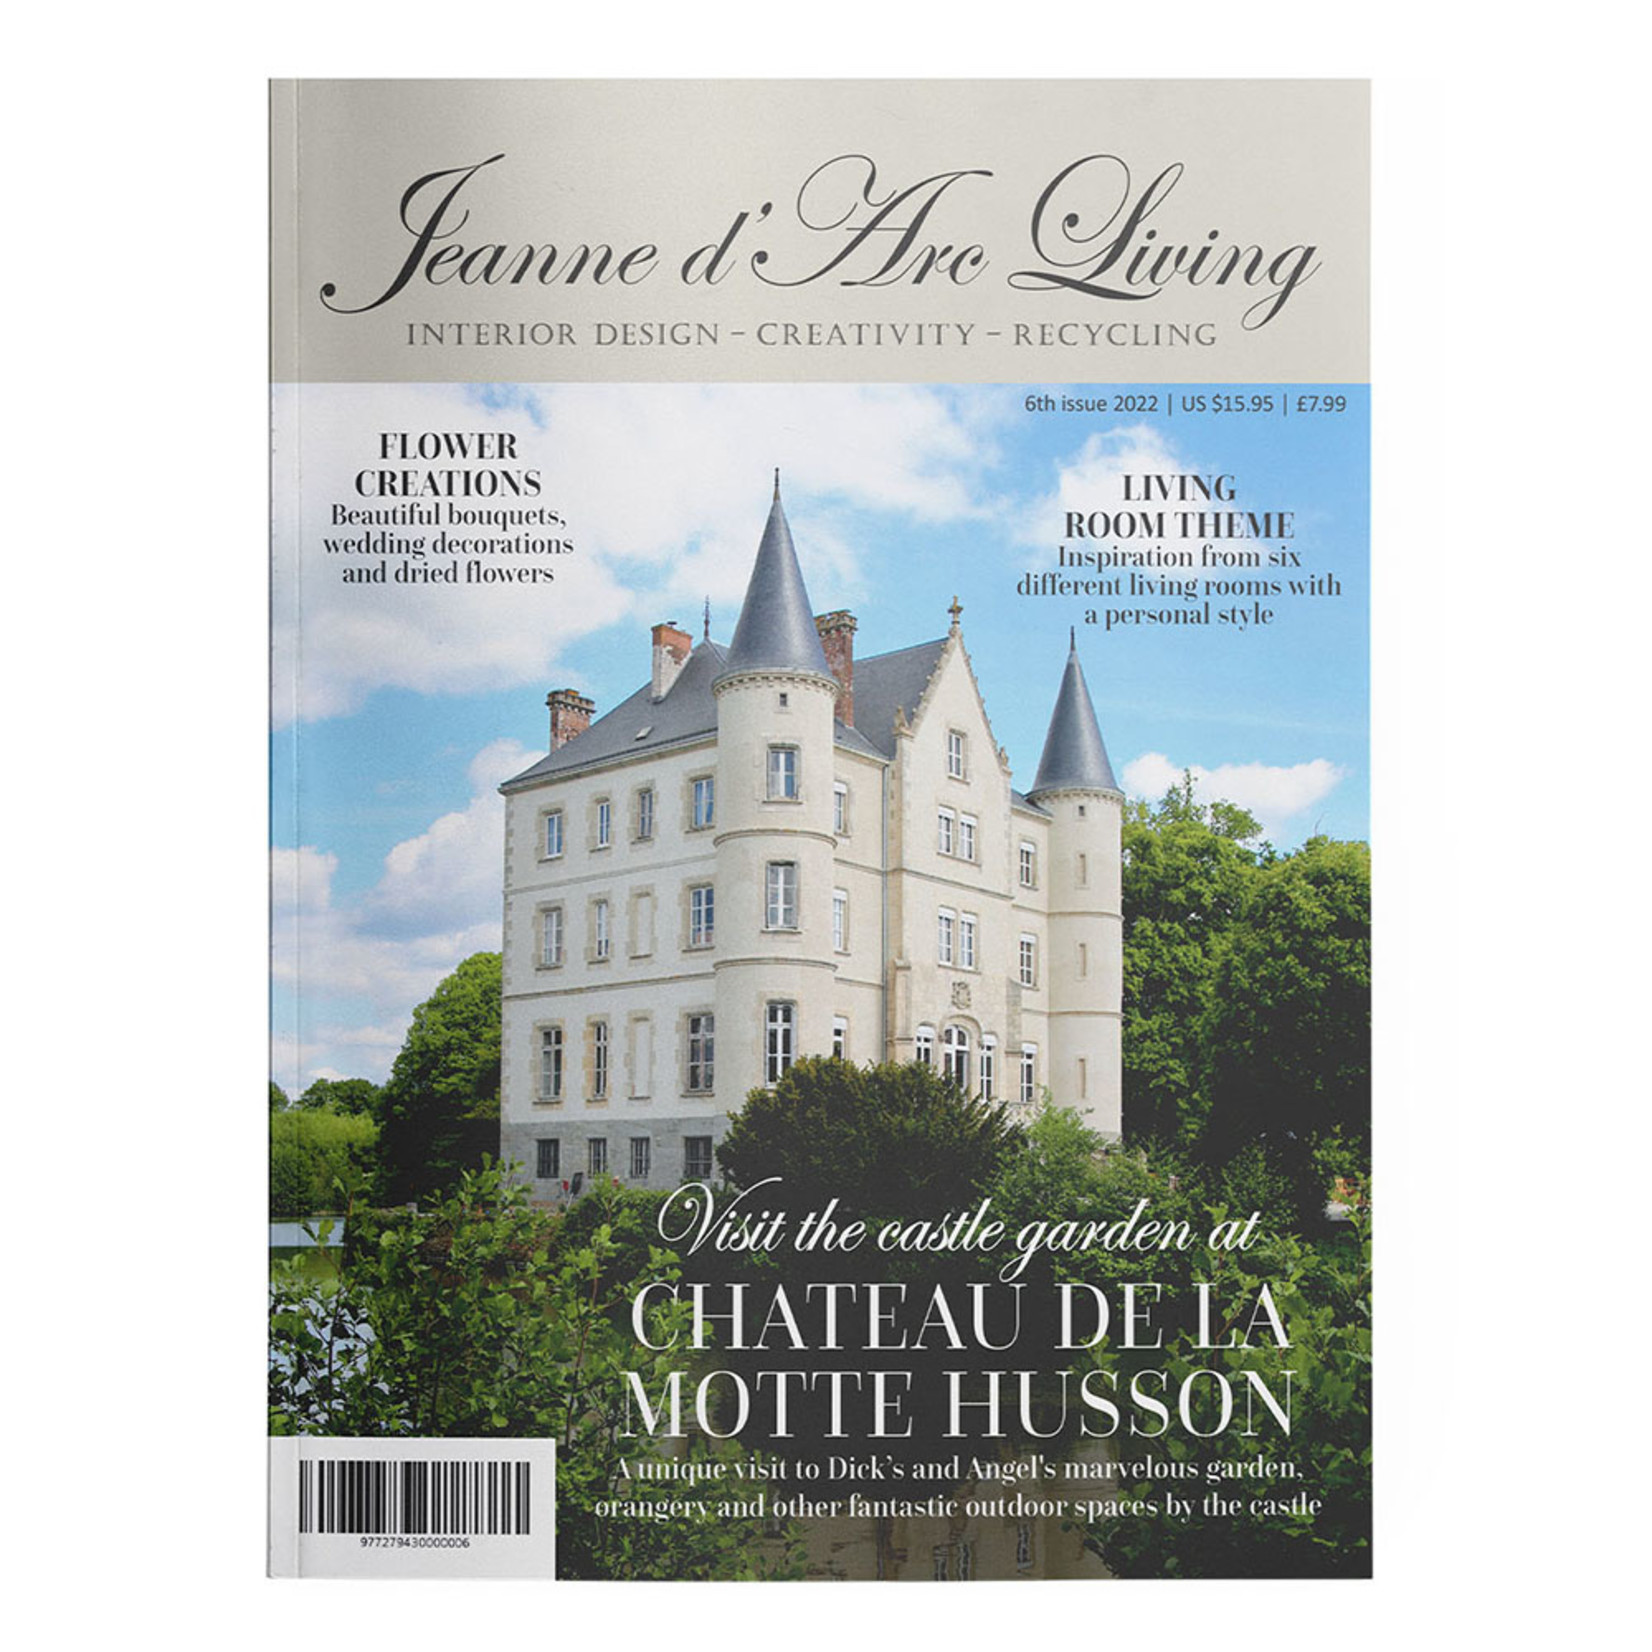 Jeanne d' Arc Living Magazine 5th Issue 2022